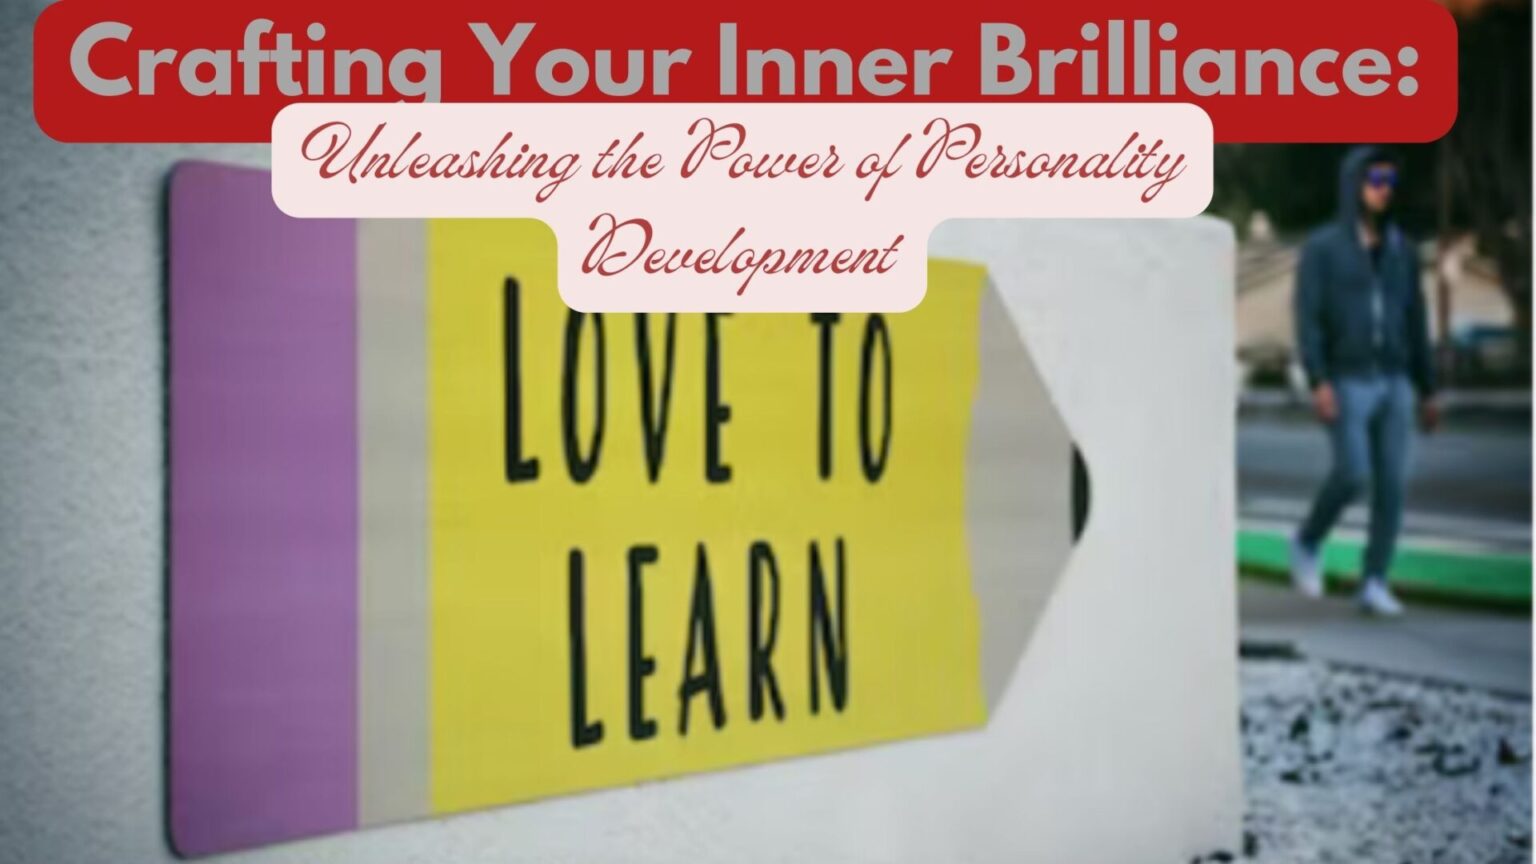 Crafting Your Inner Brilliance: Unleashing the Power of Personality Development